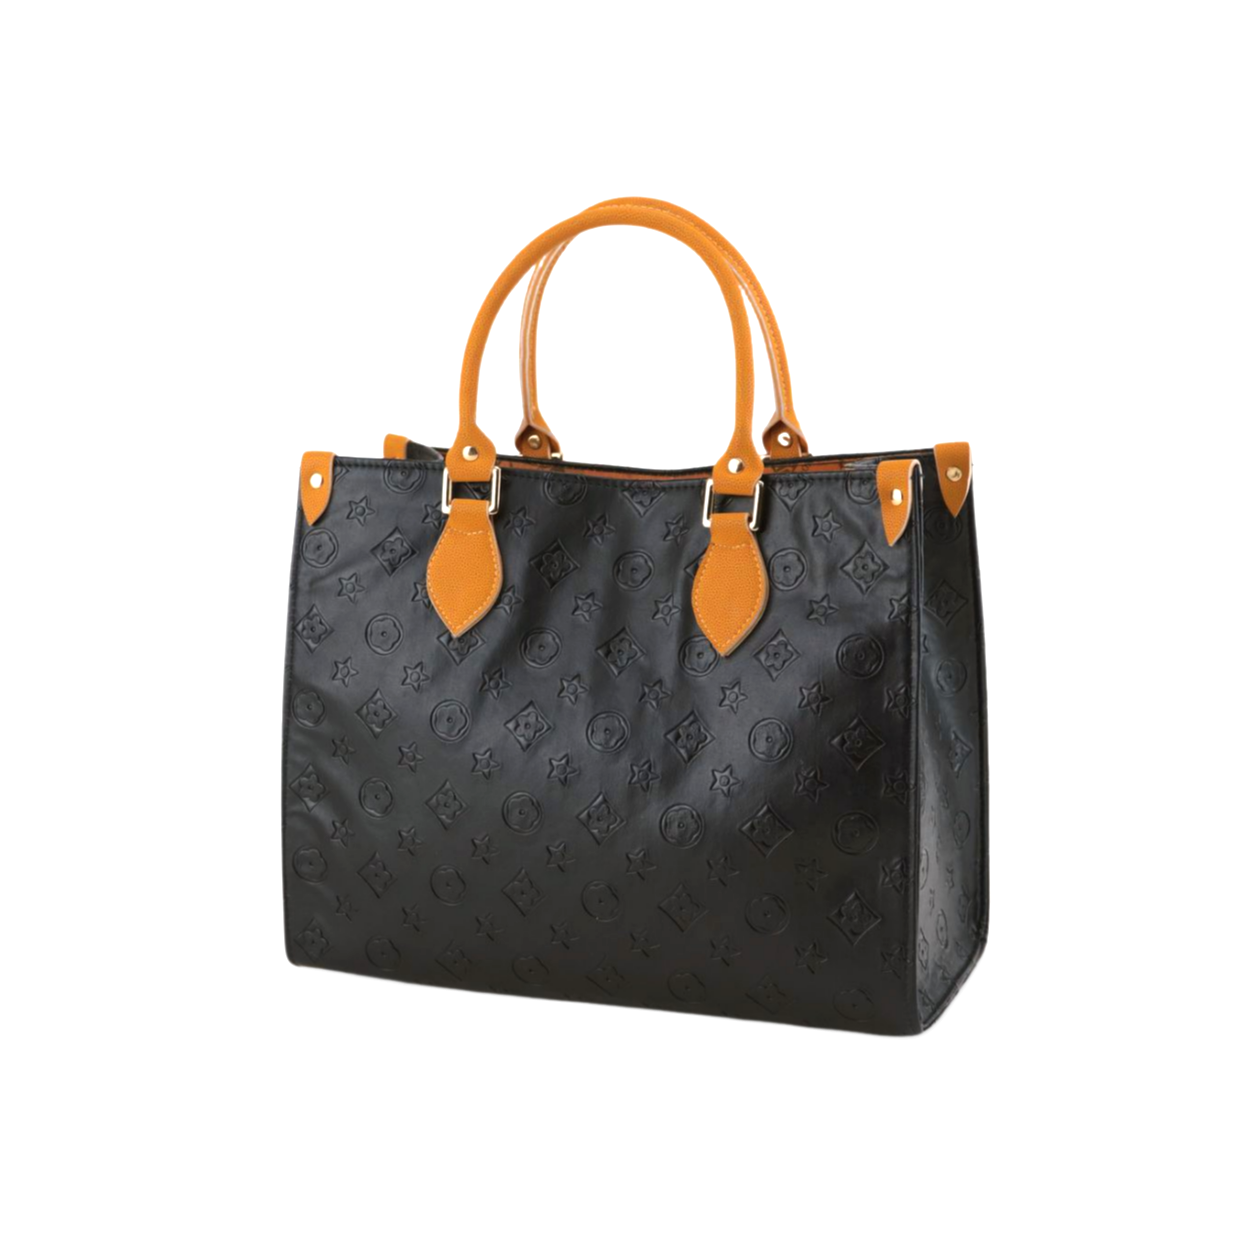 Luxury Tote Bag For Women: Versatility for Everyday Life